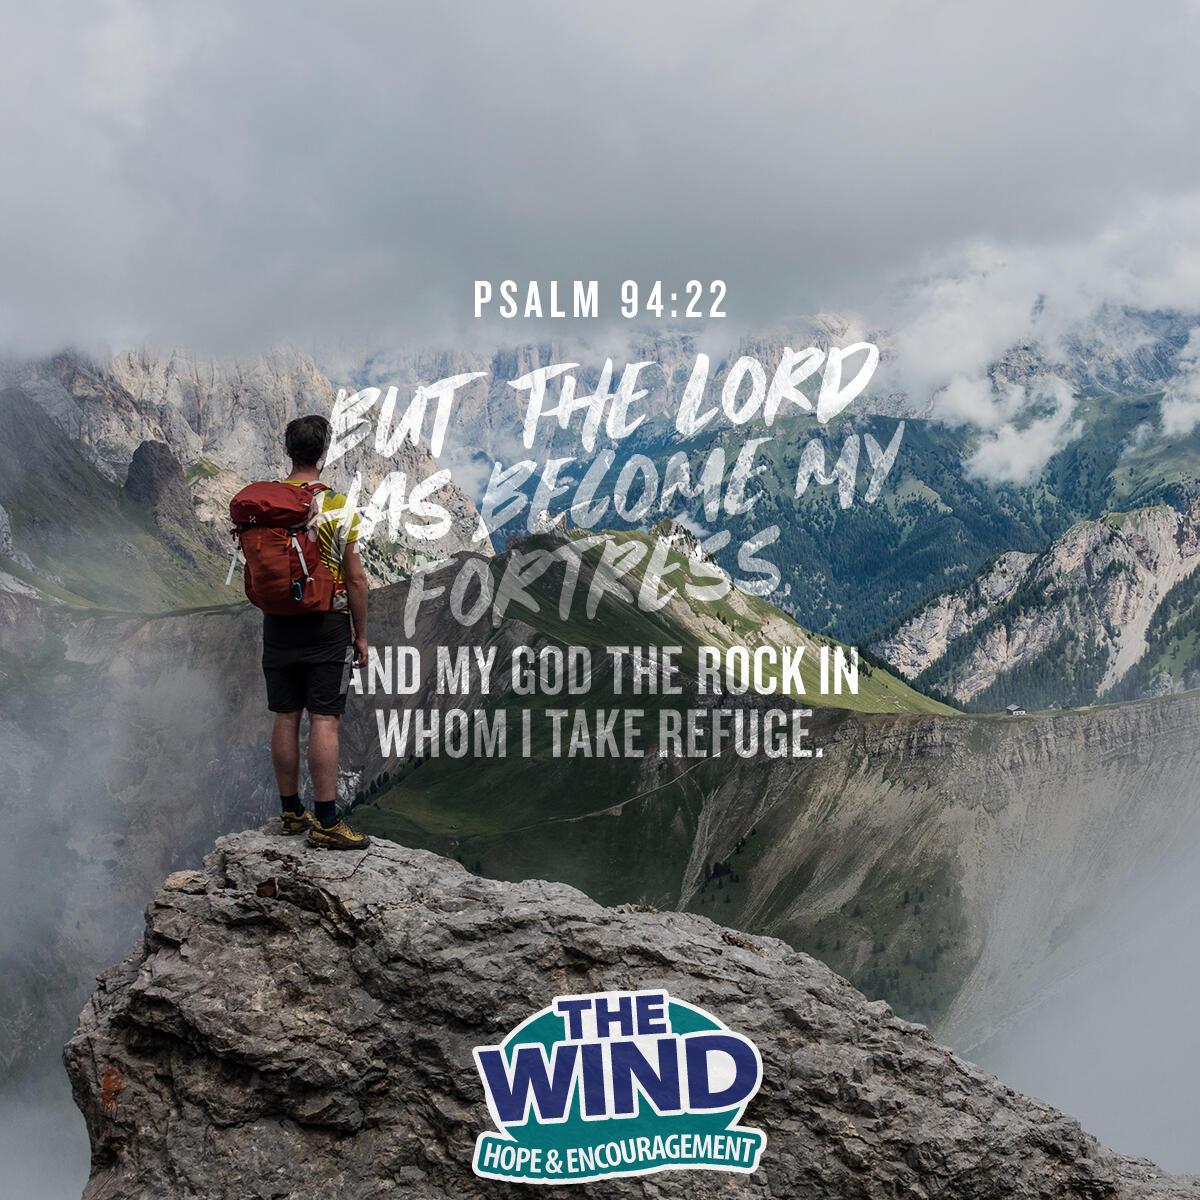 Psalm 94:22 - Verse of the Day